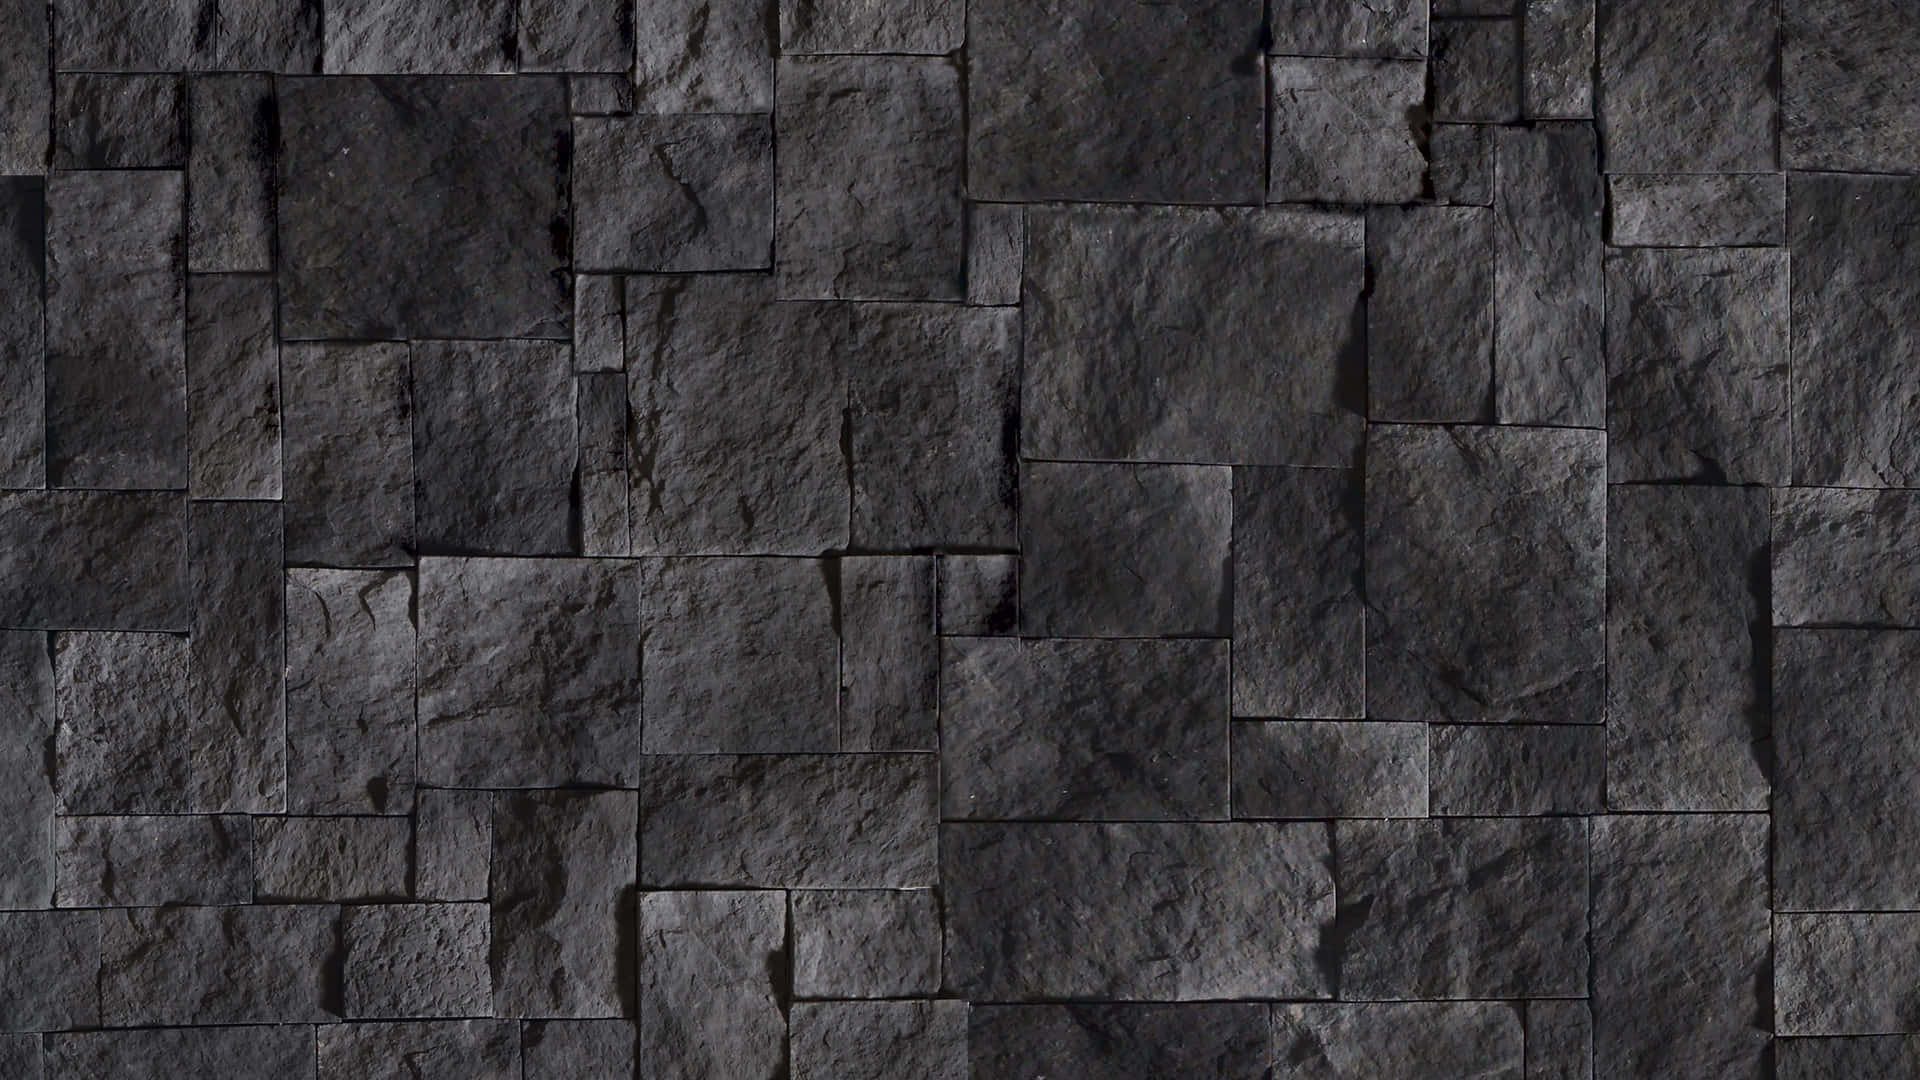 Black bricks as a compelling texture for texture design and architecture.